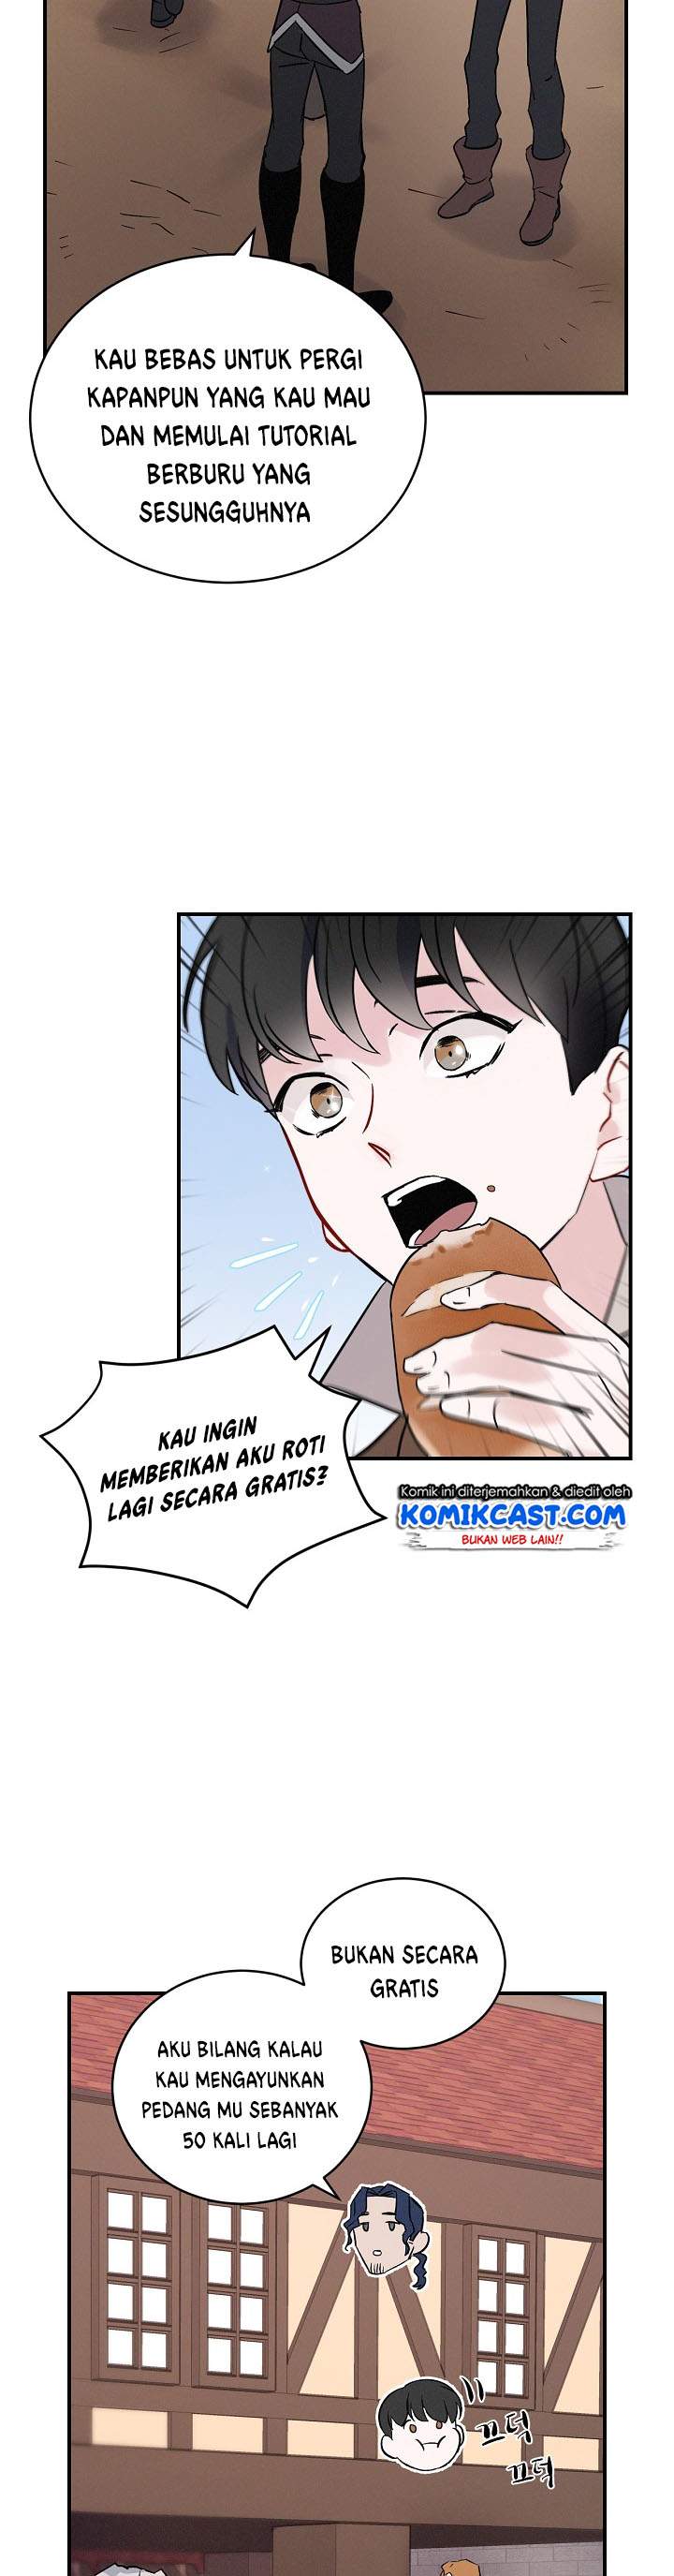 Leveling Up, By Only Eating! (Gourmet Gaming) Chapter 04 - 235